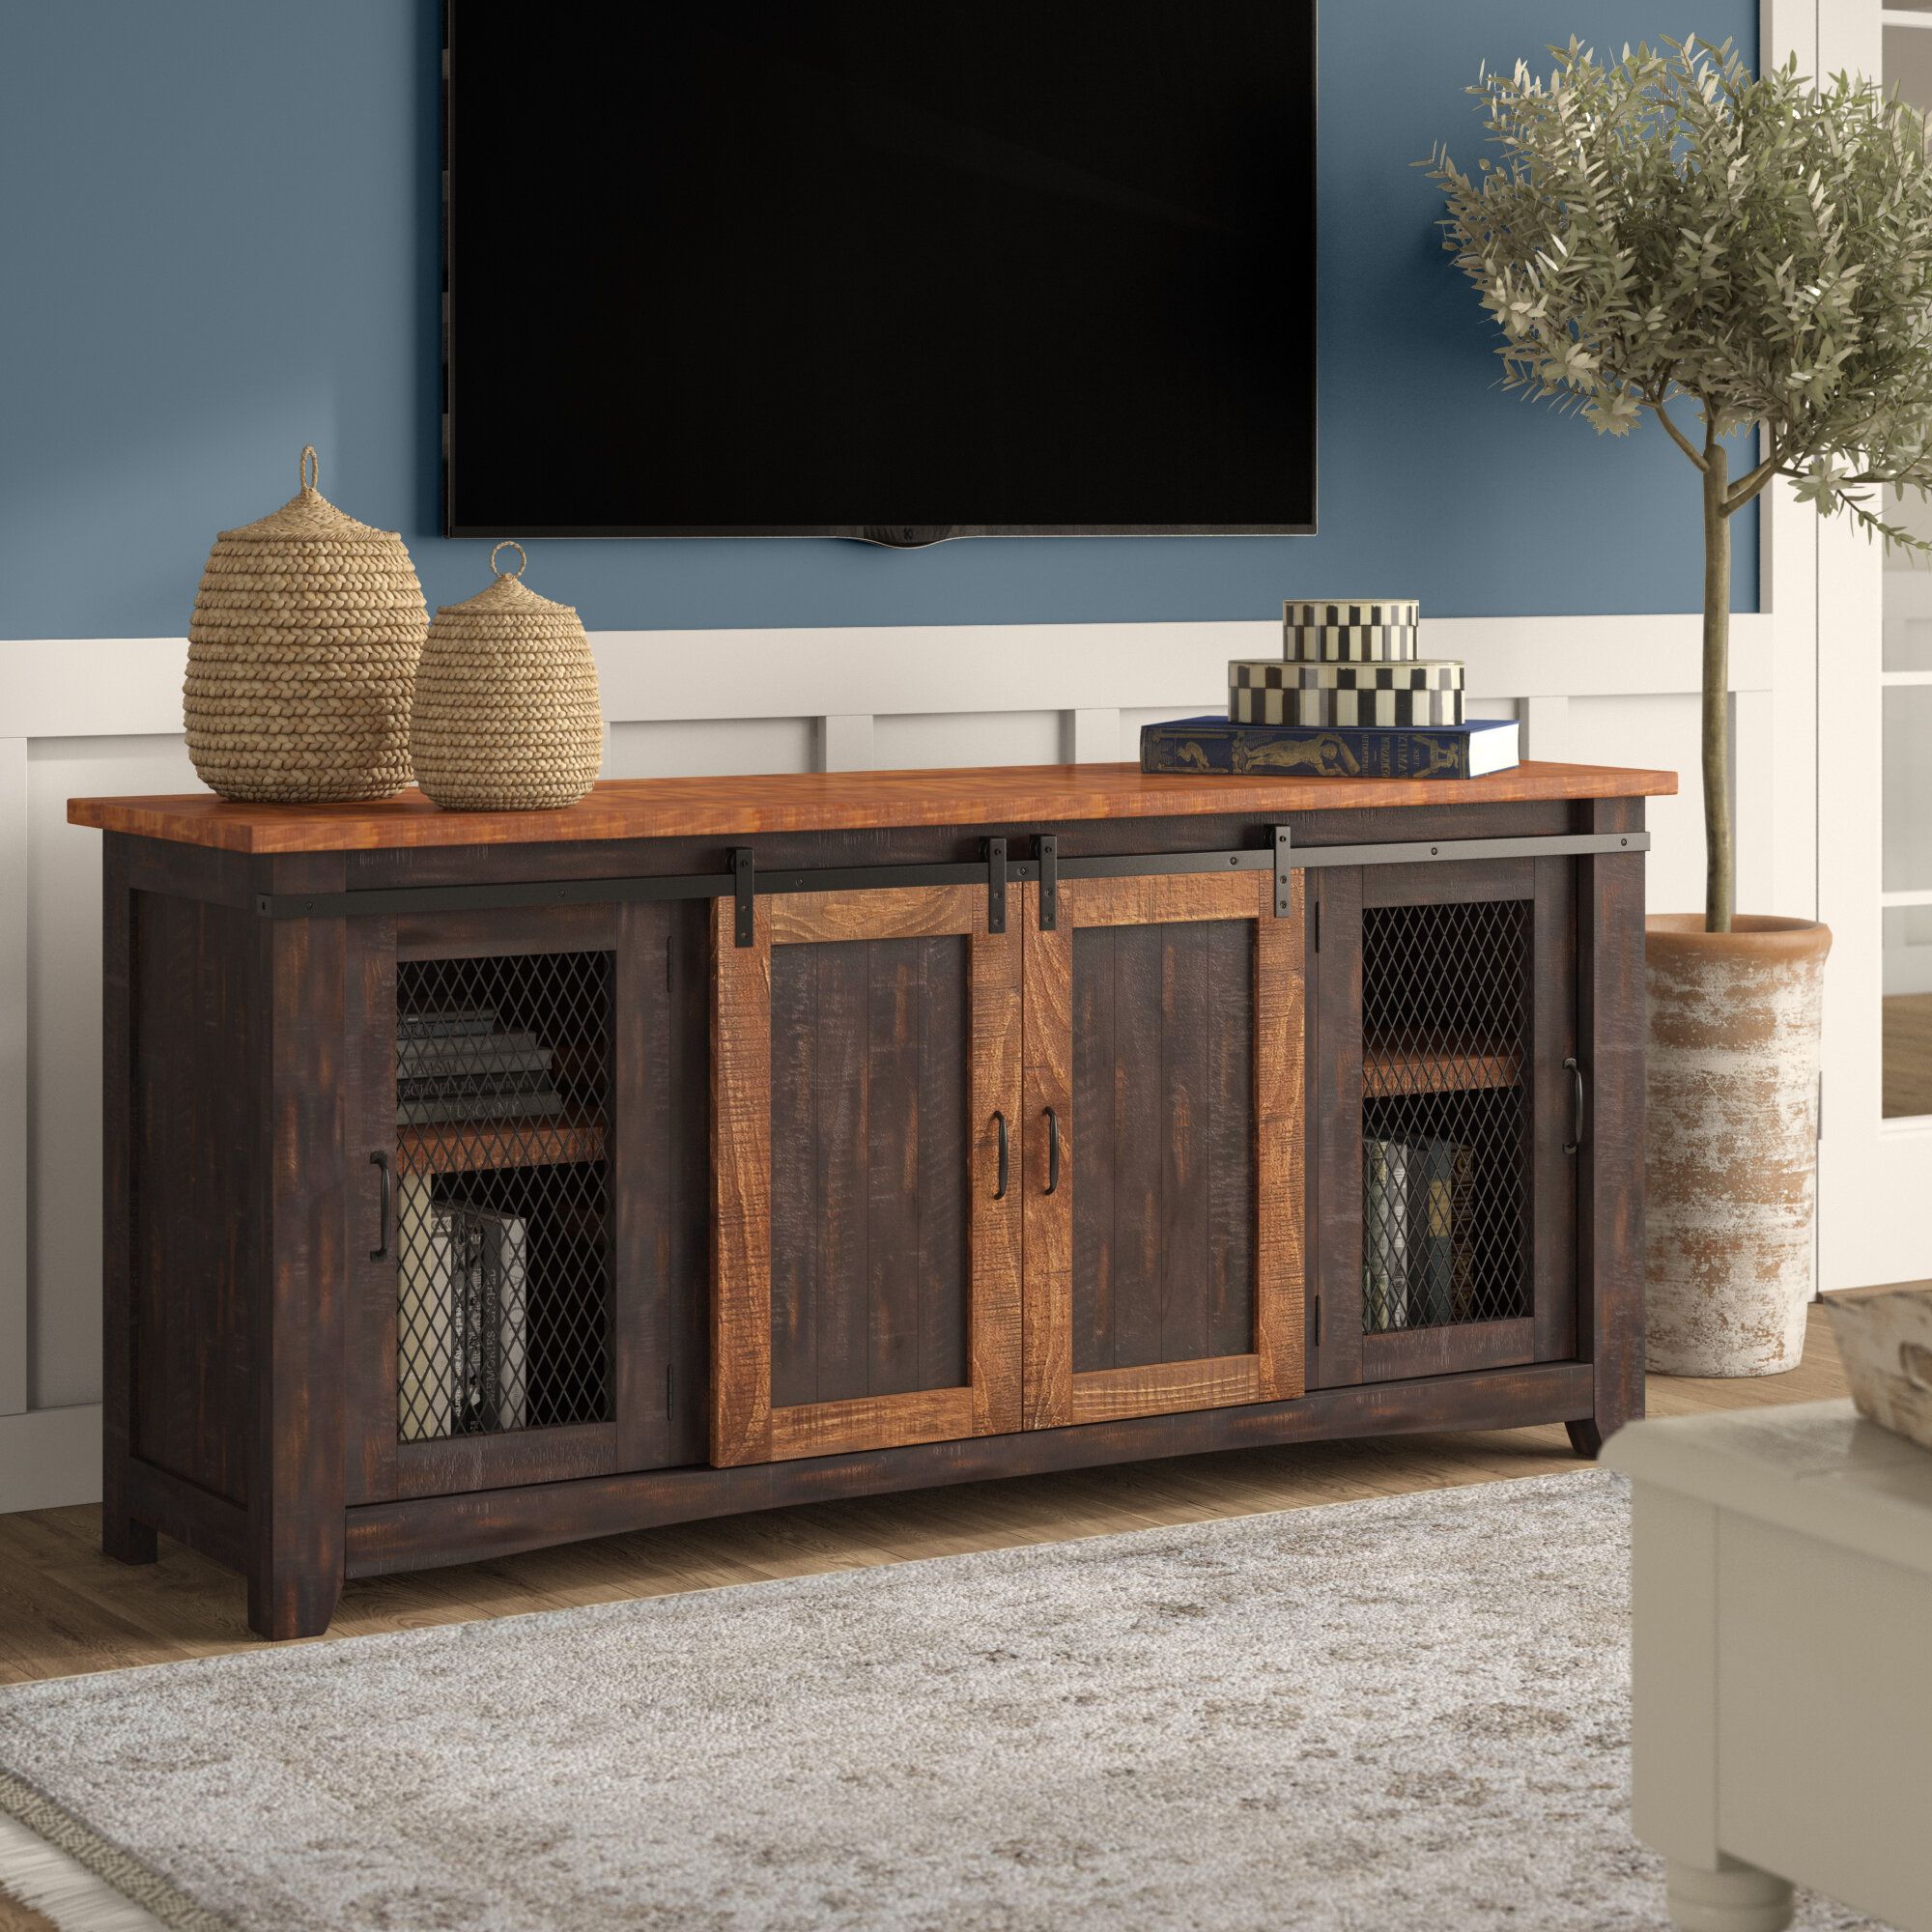 Farmhouse & Rustic Tv Stands | Birch Lane With Madison Park Rachel Grey Media Credenzas (View 16 of 30)